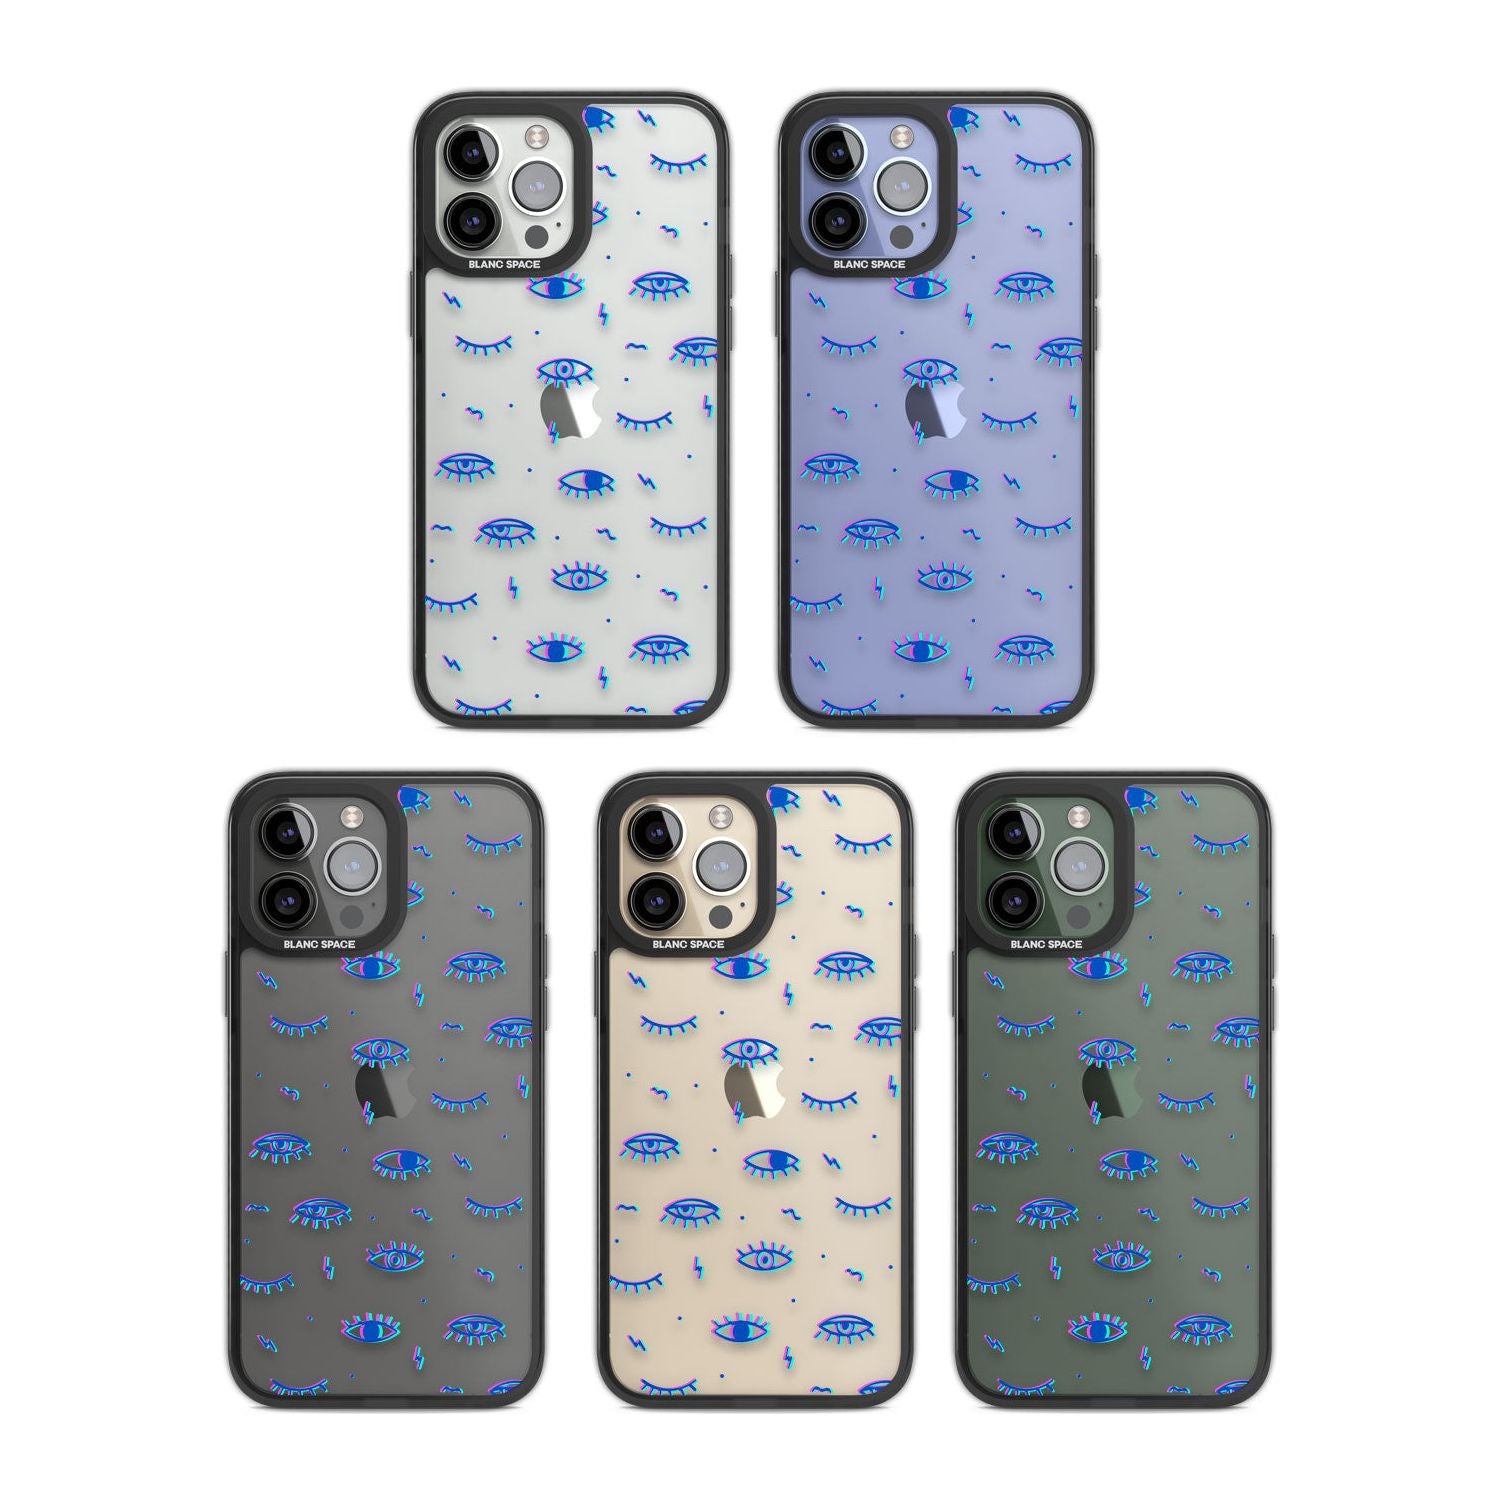 Duotone Psychedelic Eyes Phone Case iPhone 15 Pro Max / Black Impact Case,iPhone 15 Plus / Black Impact Case,iPhone 15 Pro / Black Impact Case,iPhone 15 / Black Impact Case,iPhone 15 Pro Max / Impact Case,iPhone 15 Plus / Impact Case,iPhone 15 Pro / Impact Case,iPhone 15 / Impact Case,iPhone 15 Pro Max / Magsafe Black Impact Case,iPhone 15 Plus / Magsafe Black Impact Case,iPhone 15 Pro / Magsafe Black Impact Case,iPhone 15 / Magsafe Black Impact Case,iPhone 14 Pro Max / Black Impact Case,iPhone 14 Plus / Bl